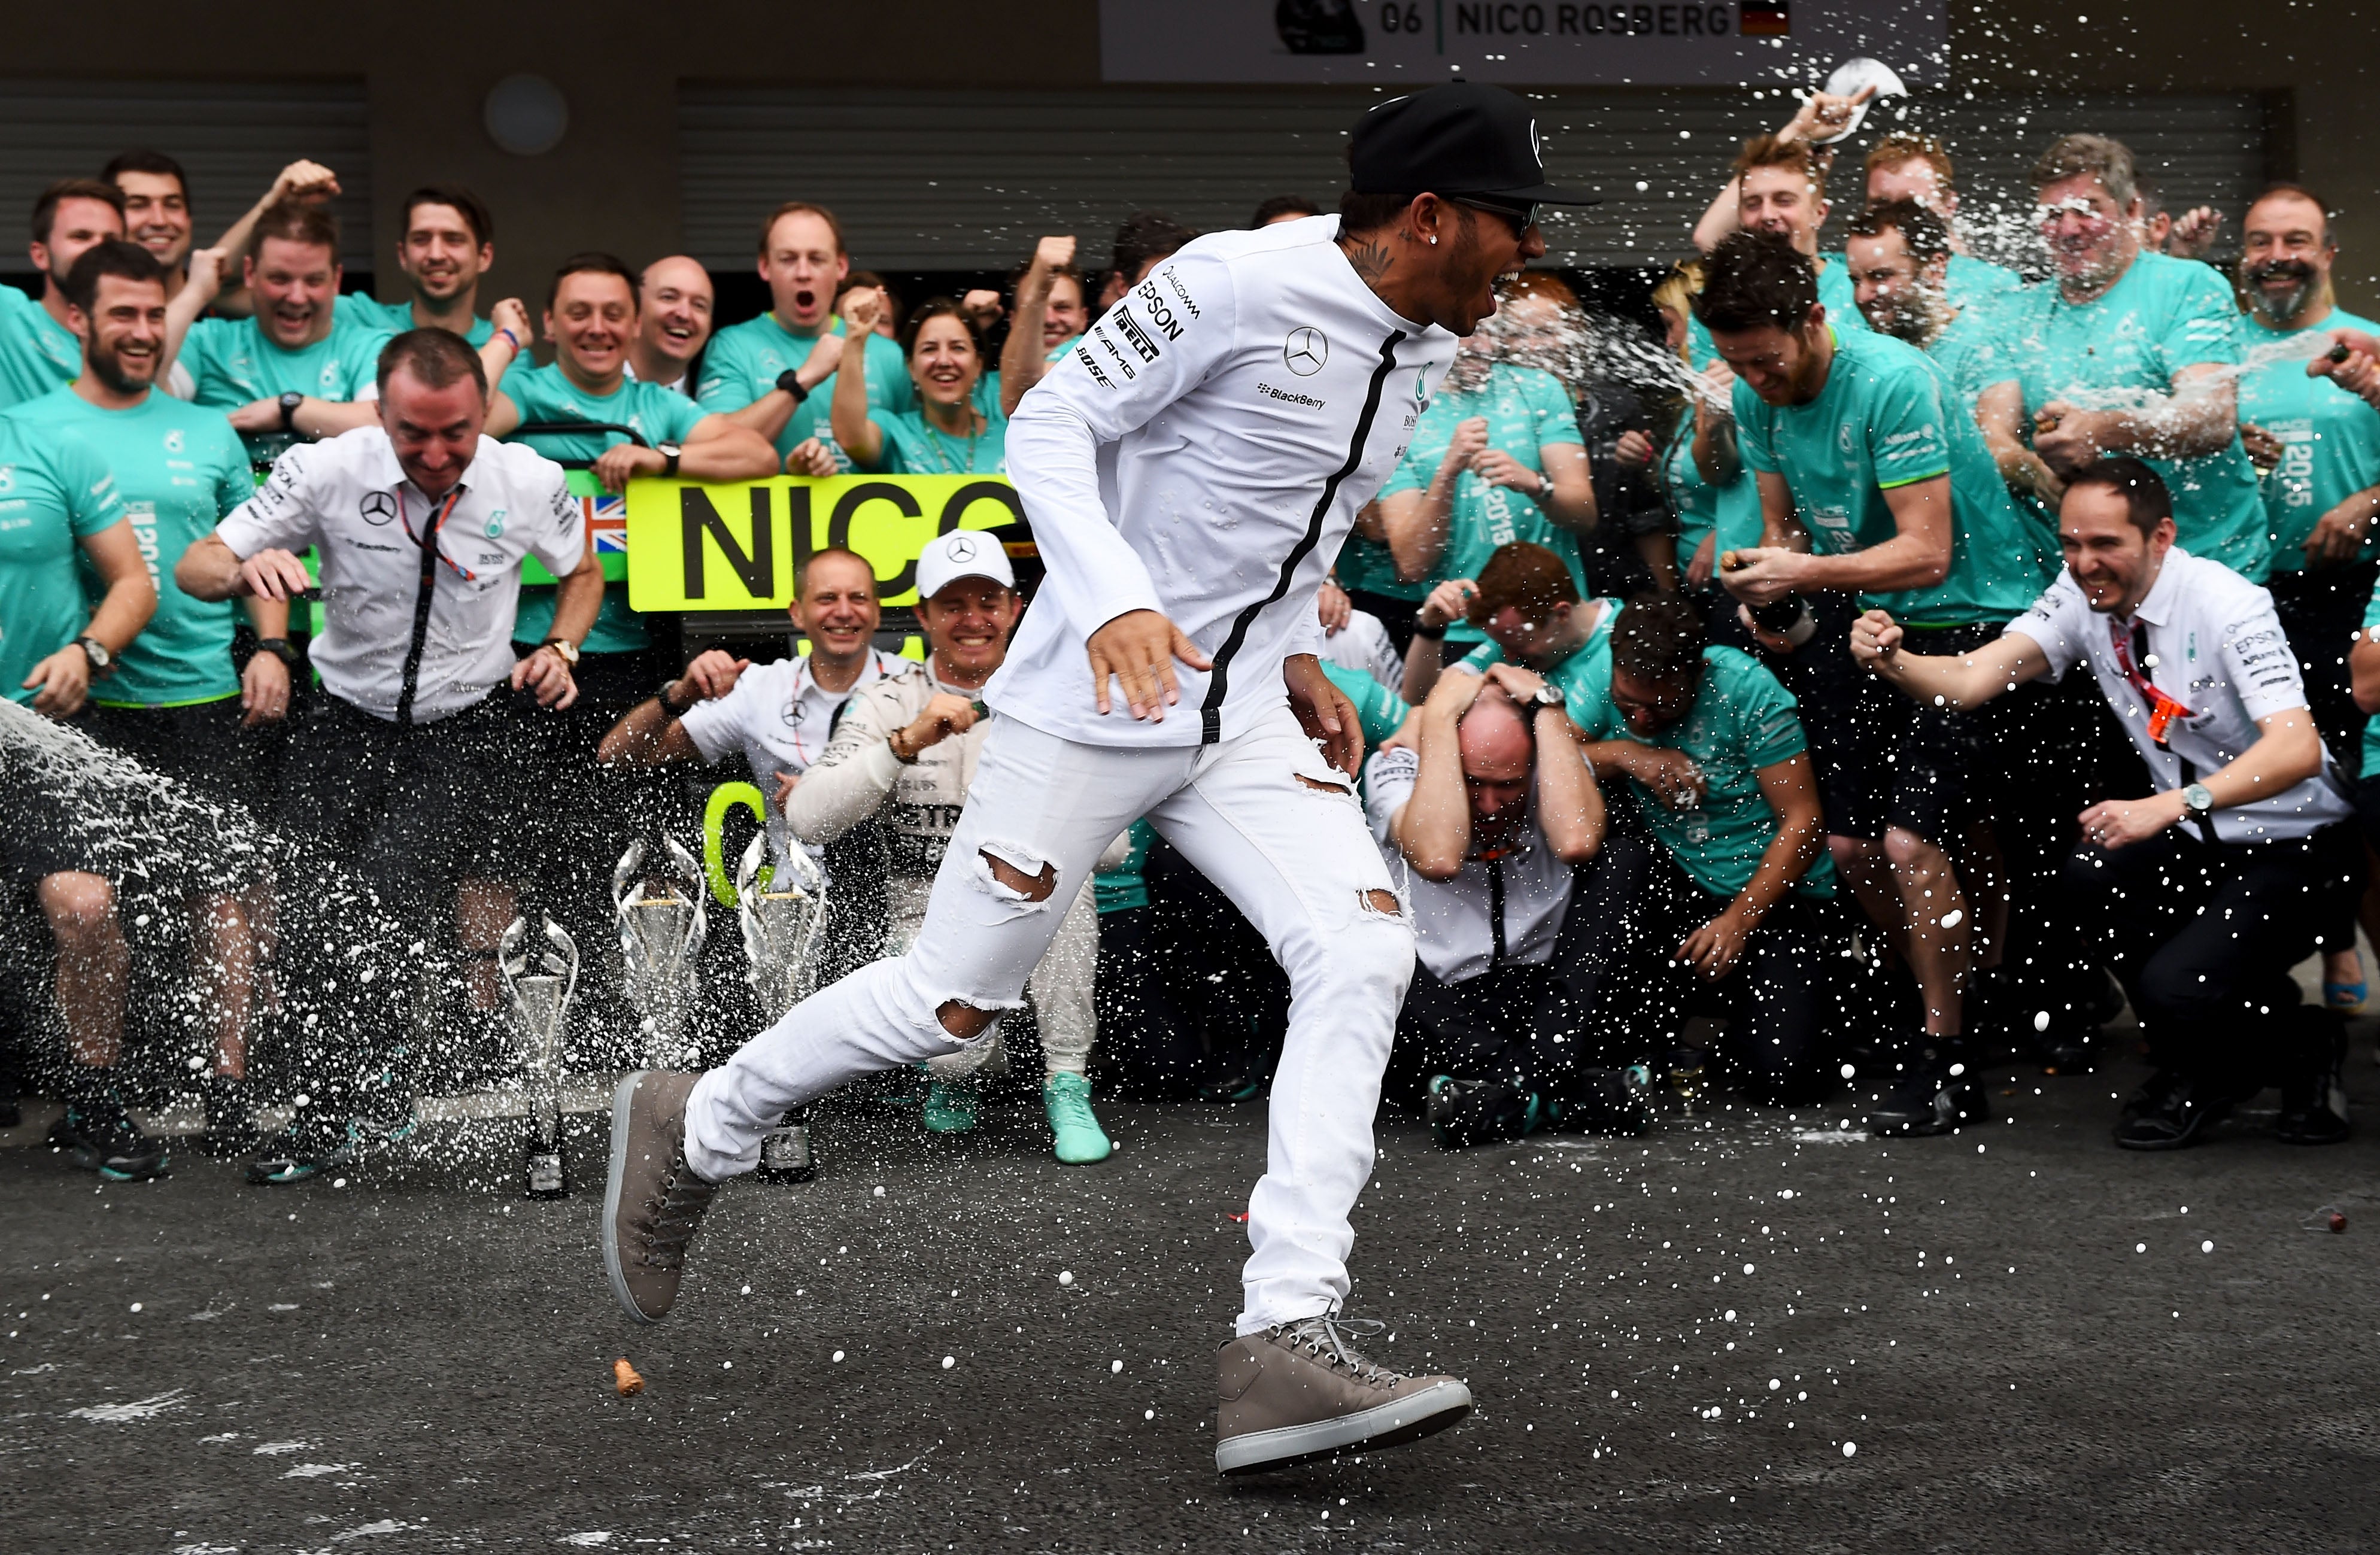 After six world titles, Hamilton has decided to leave Mercedes at the end of the year